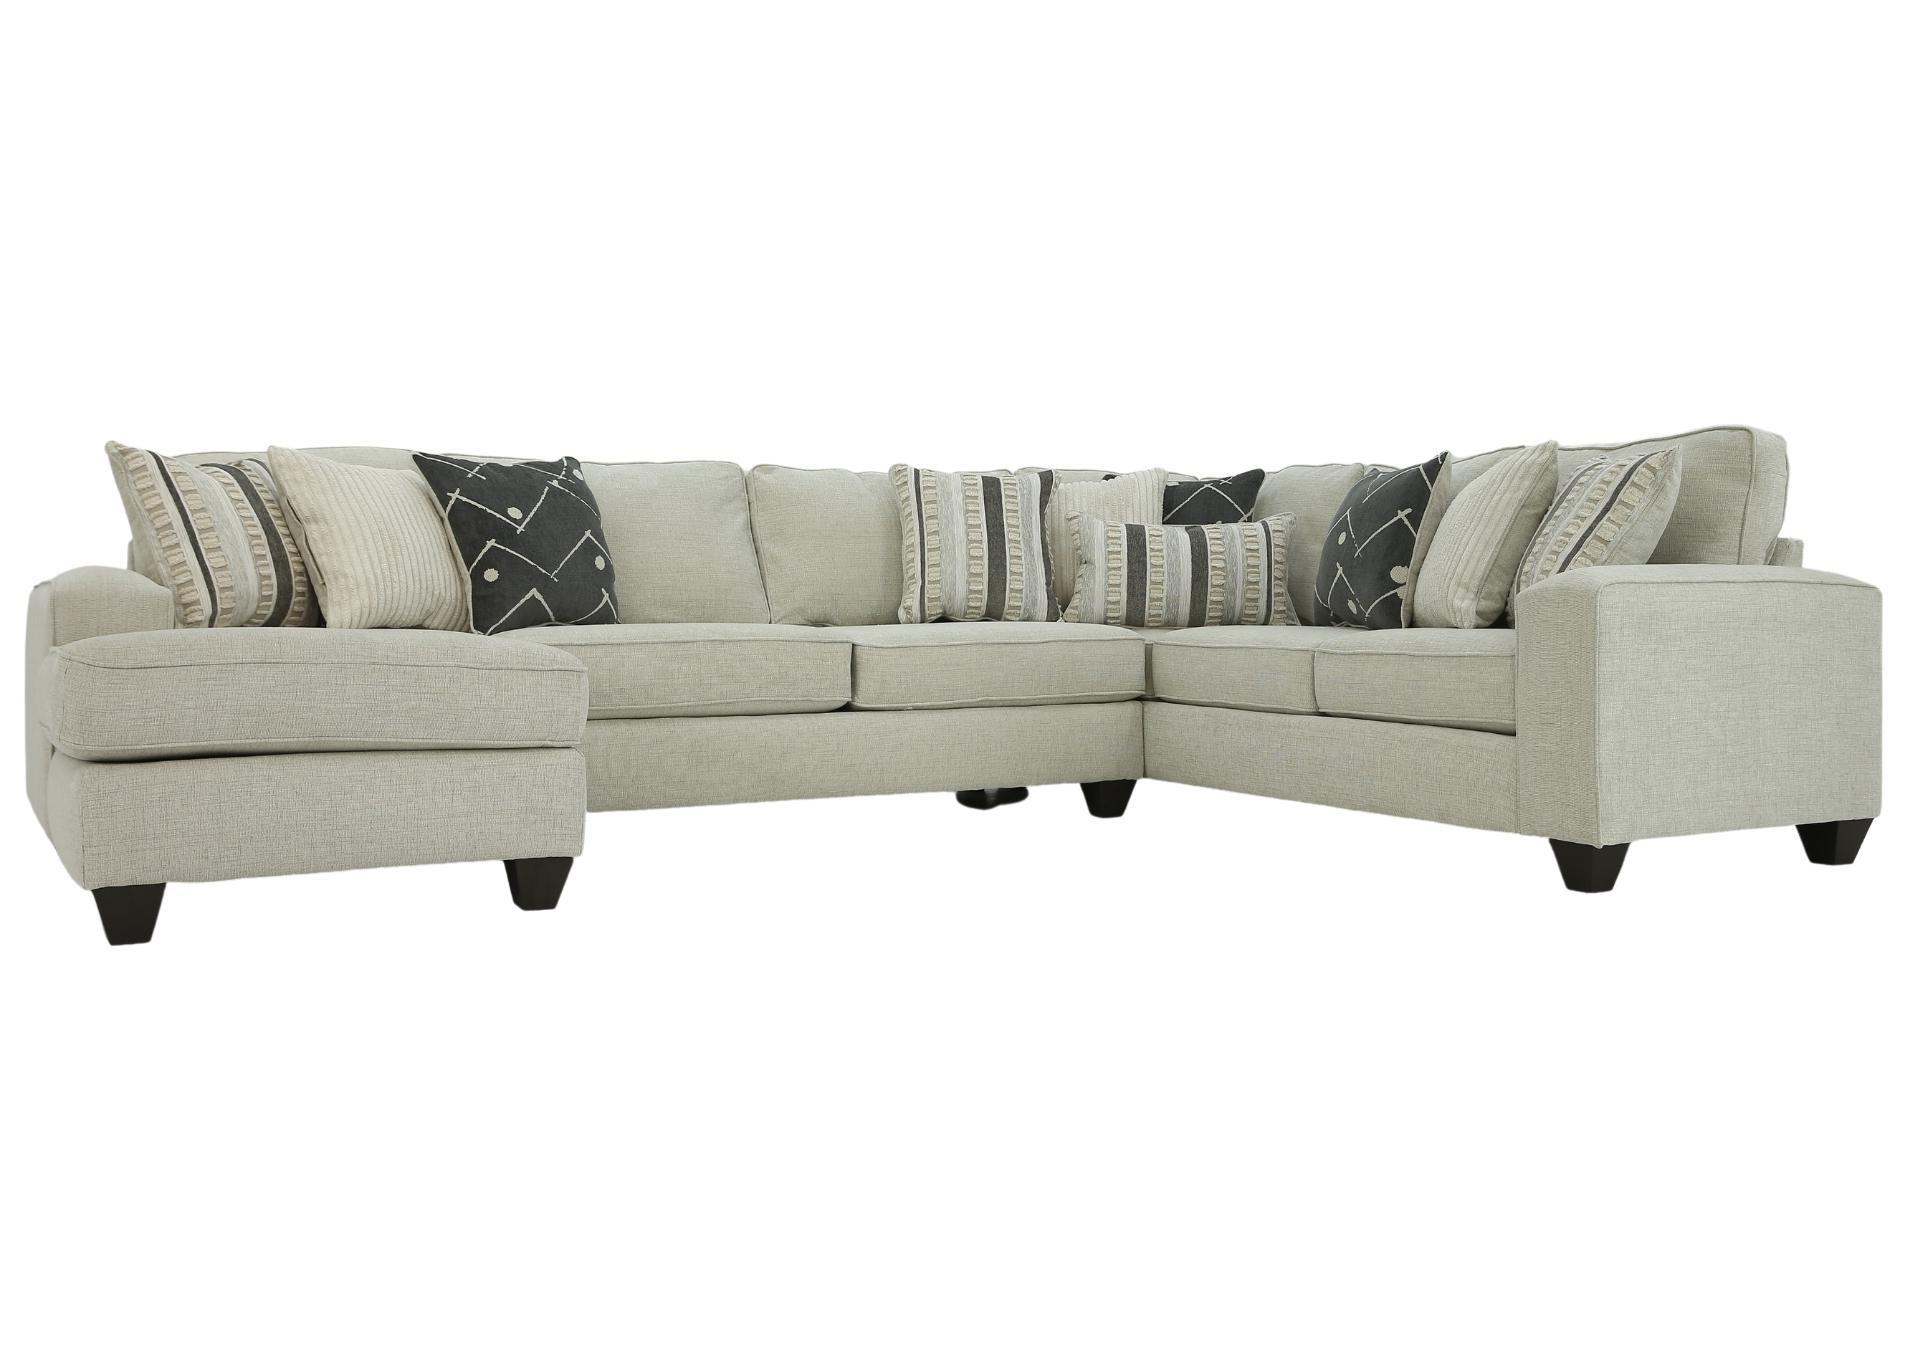 PERSIA BEIGE 3 PIECE SECTIONAL